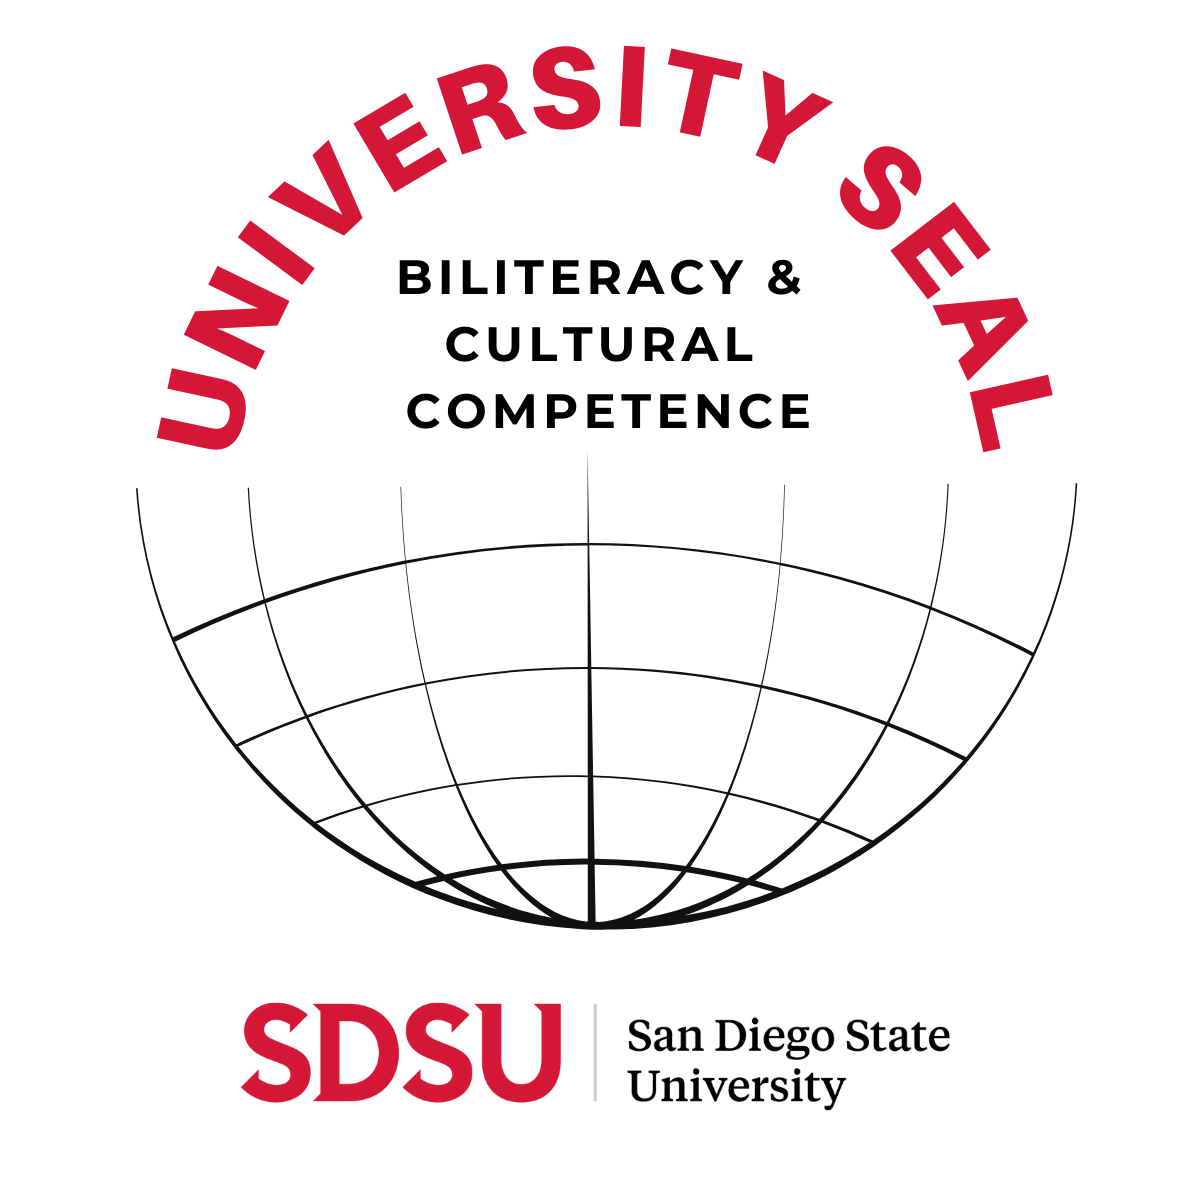 University Seal of Biliteracy and Cultural Competence (USBCC)